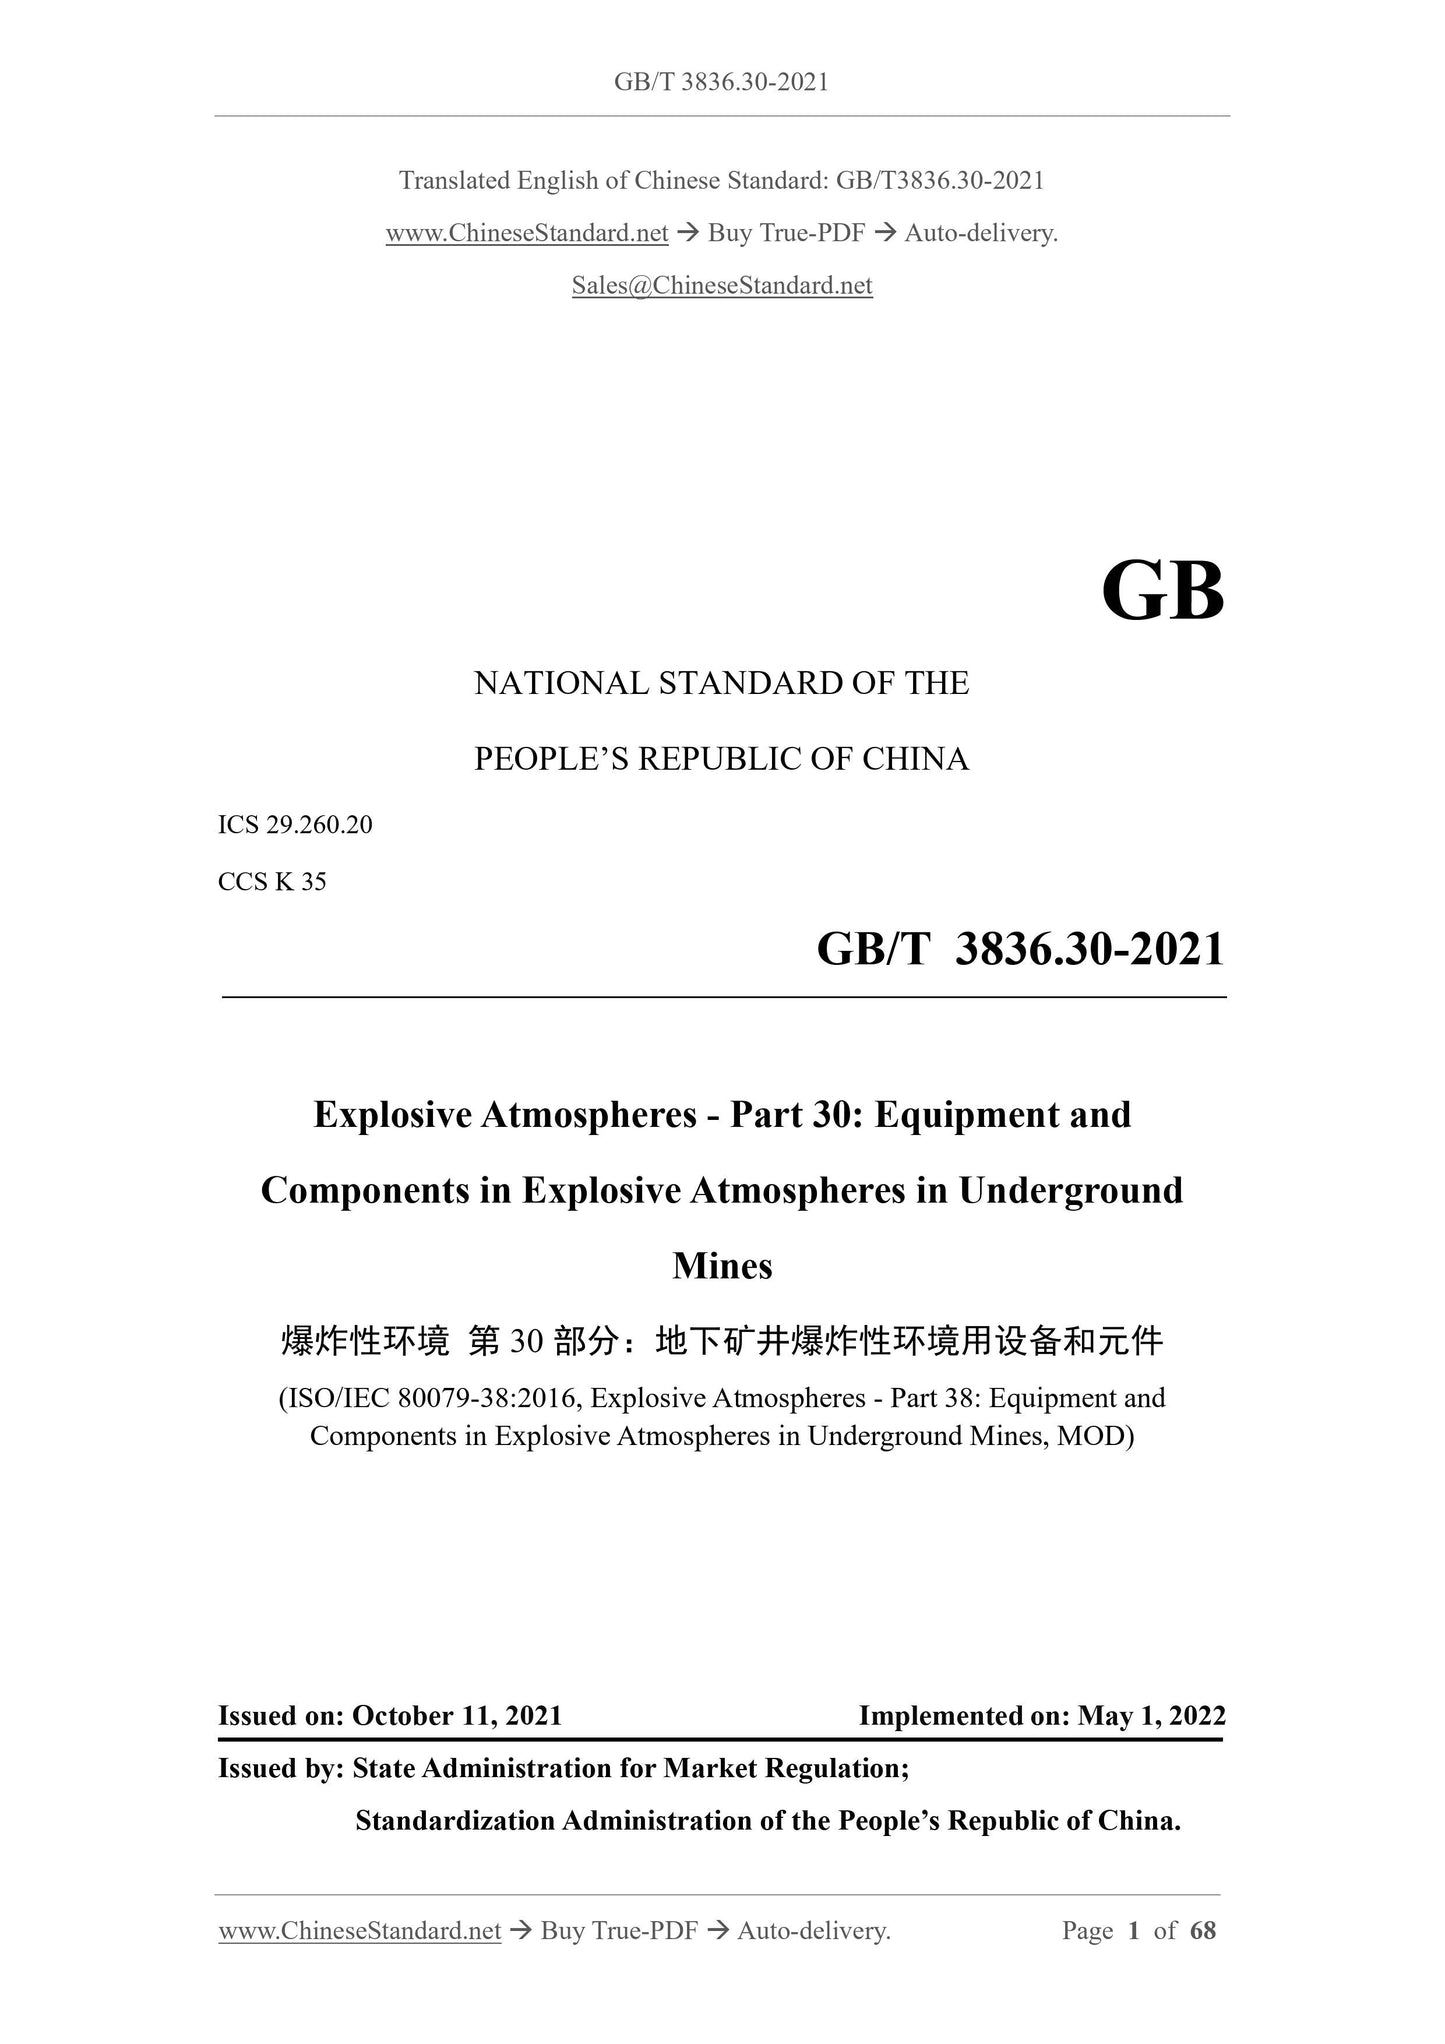 GB/T 3836.30-2021 Page 1